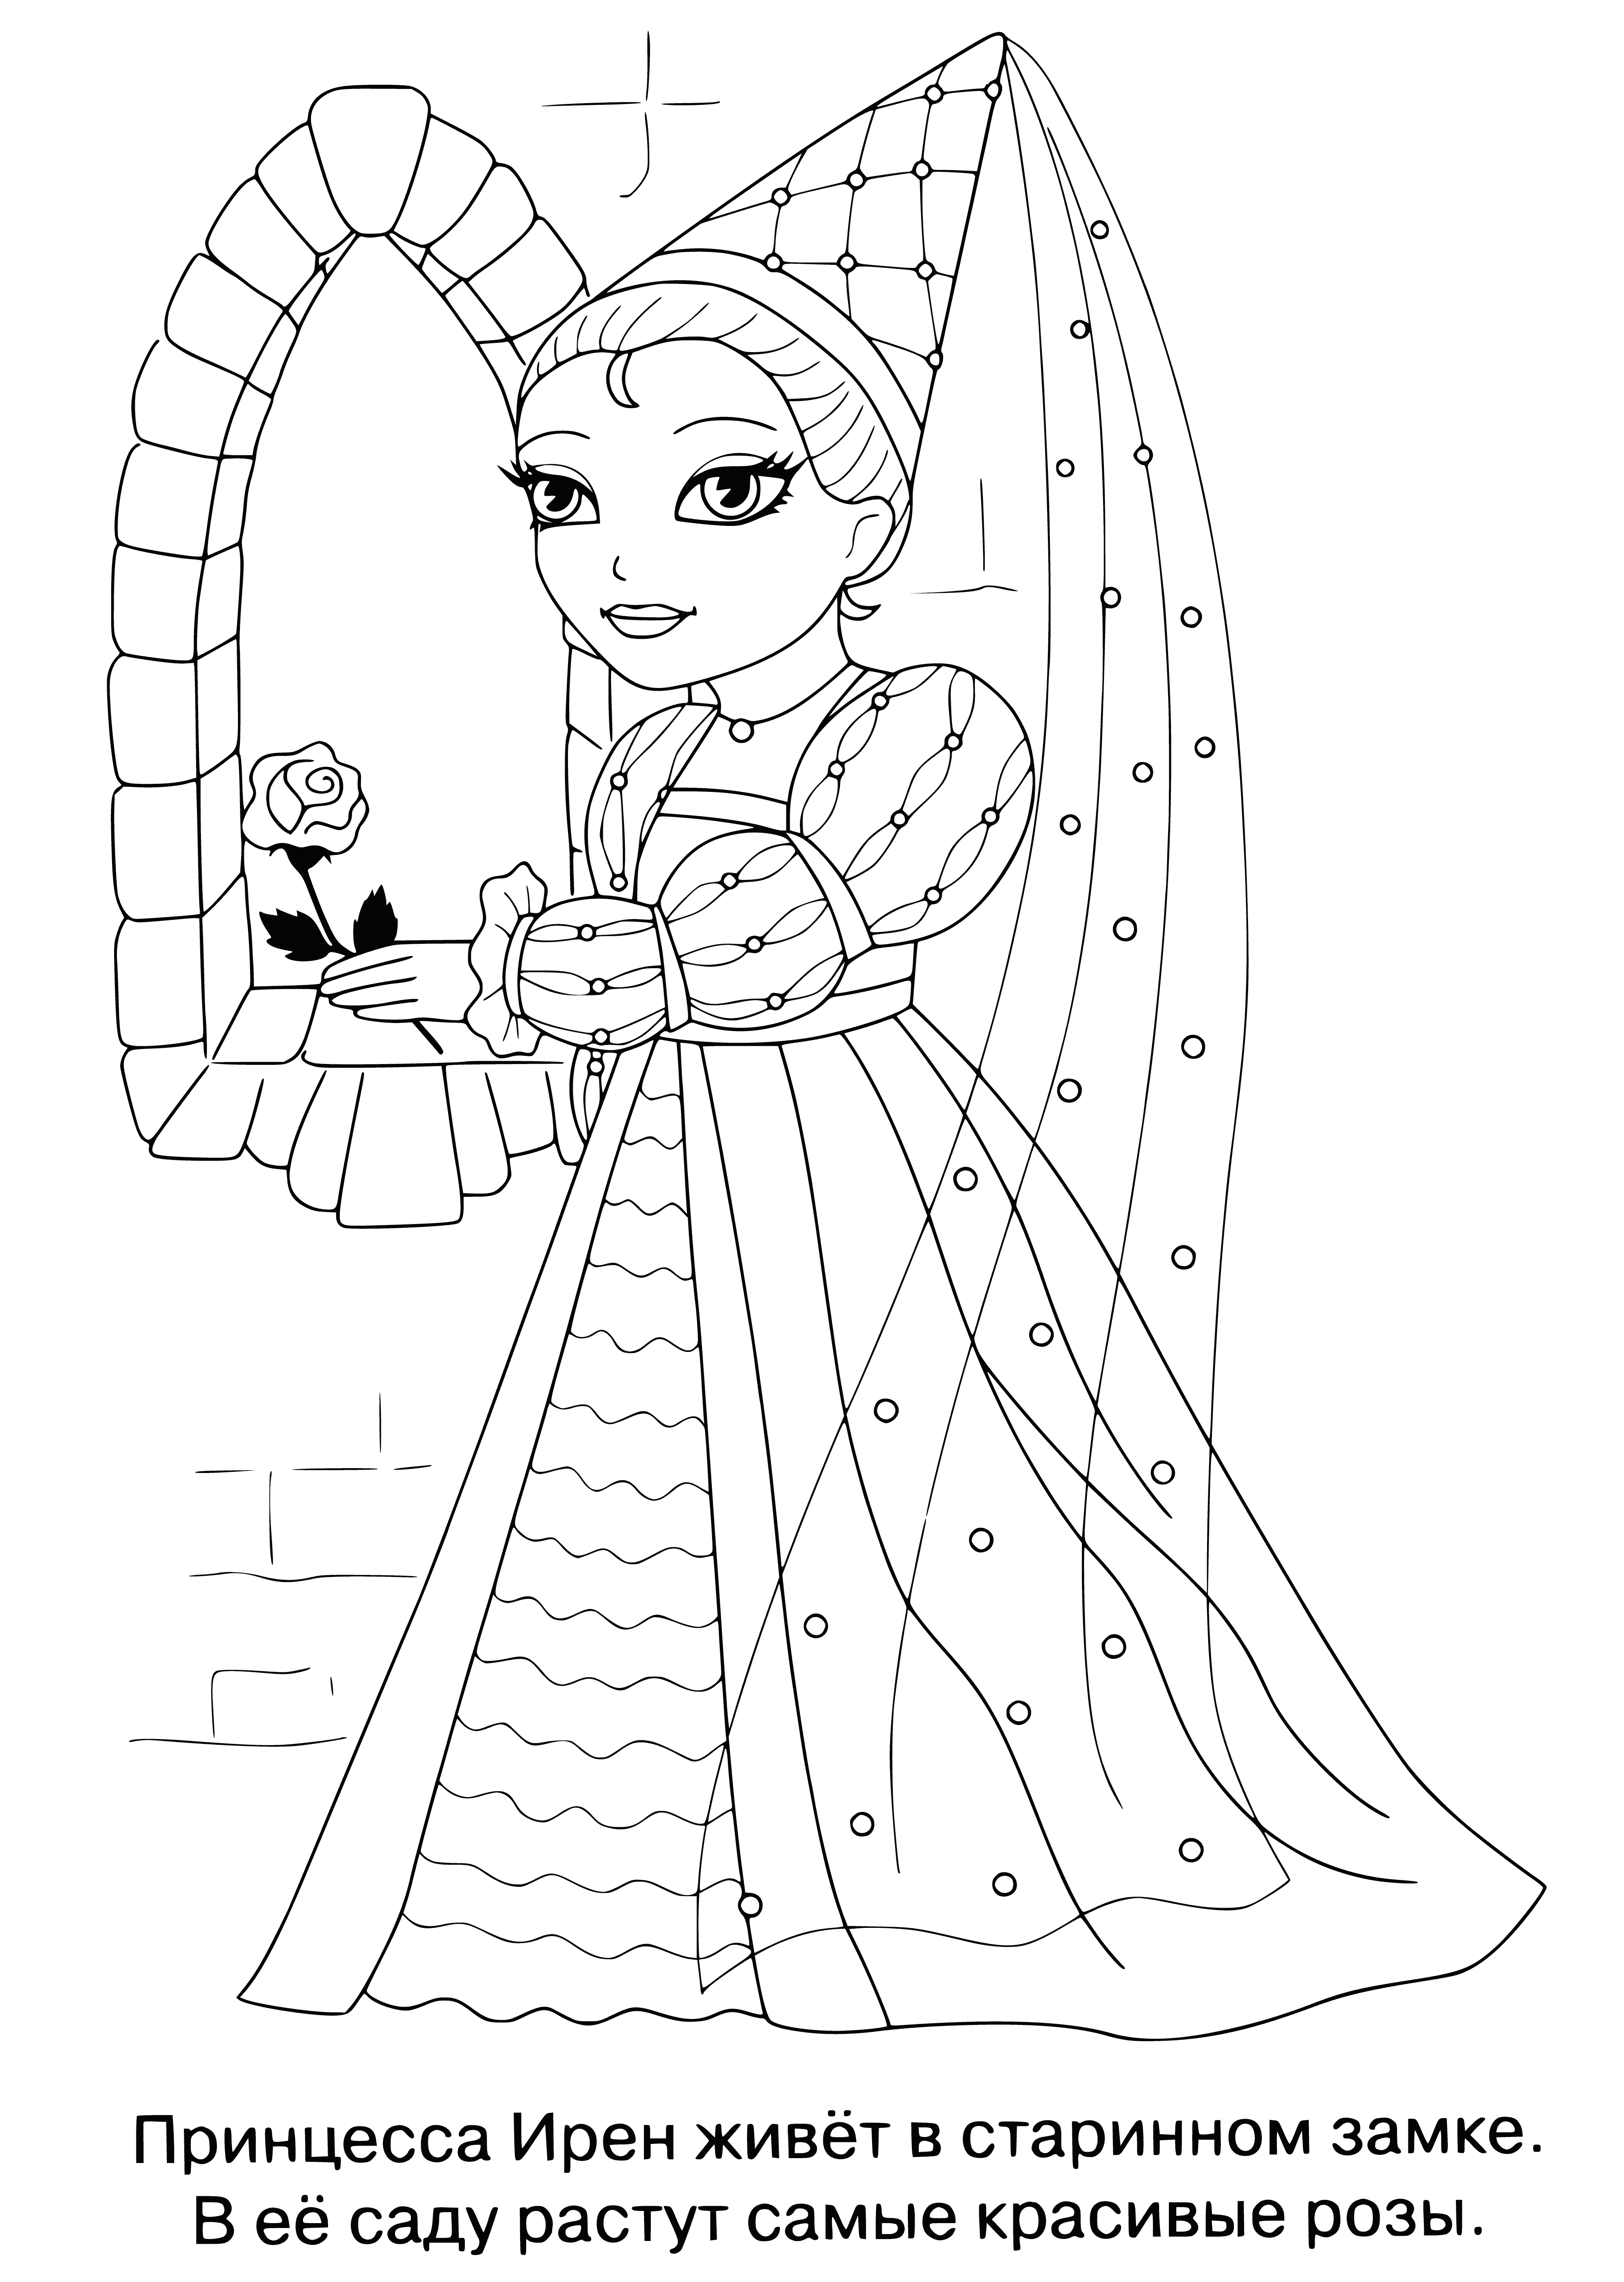 coloring page: Princess Irene surrounded by a heart-shaped frame, in pink dress & gold crown, w/ blonde hair & blue eyes.